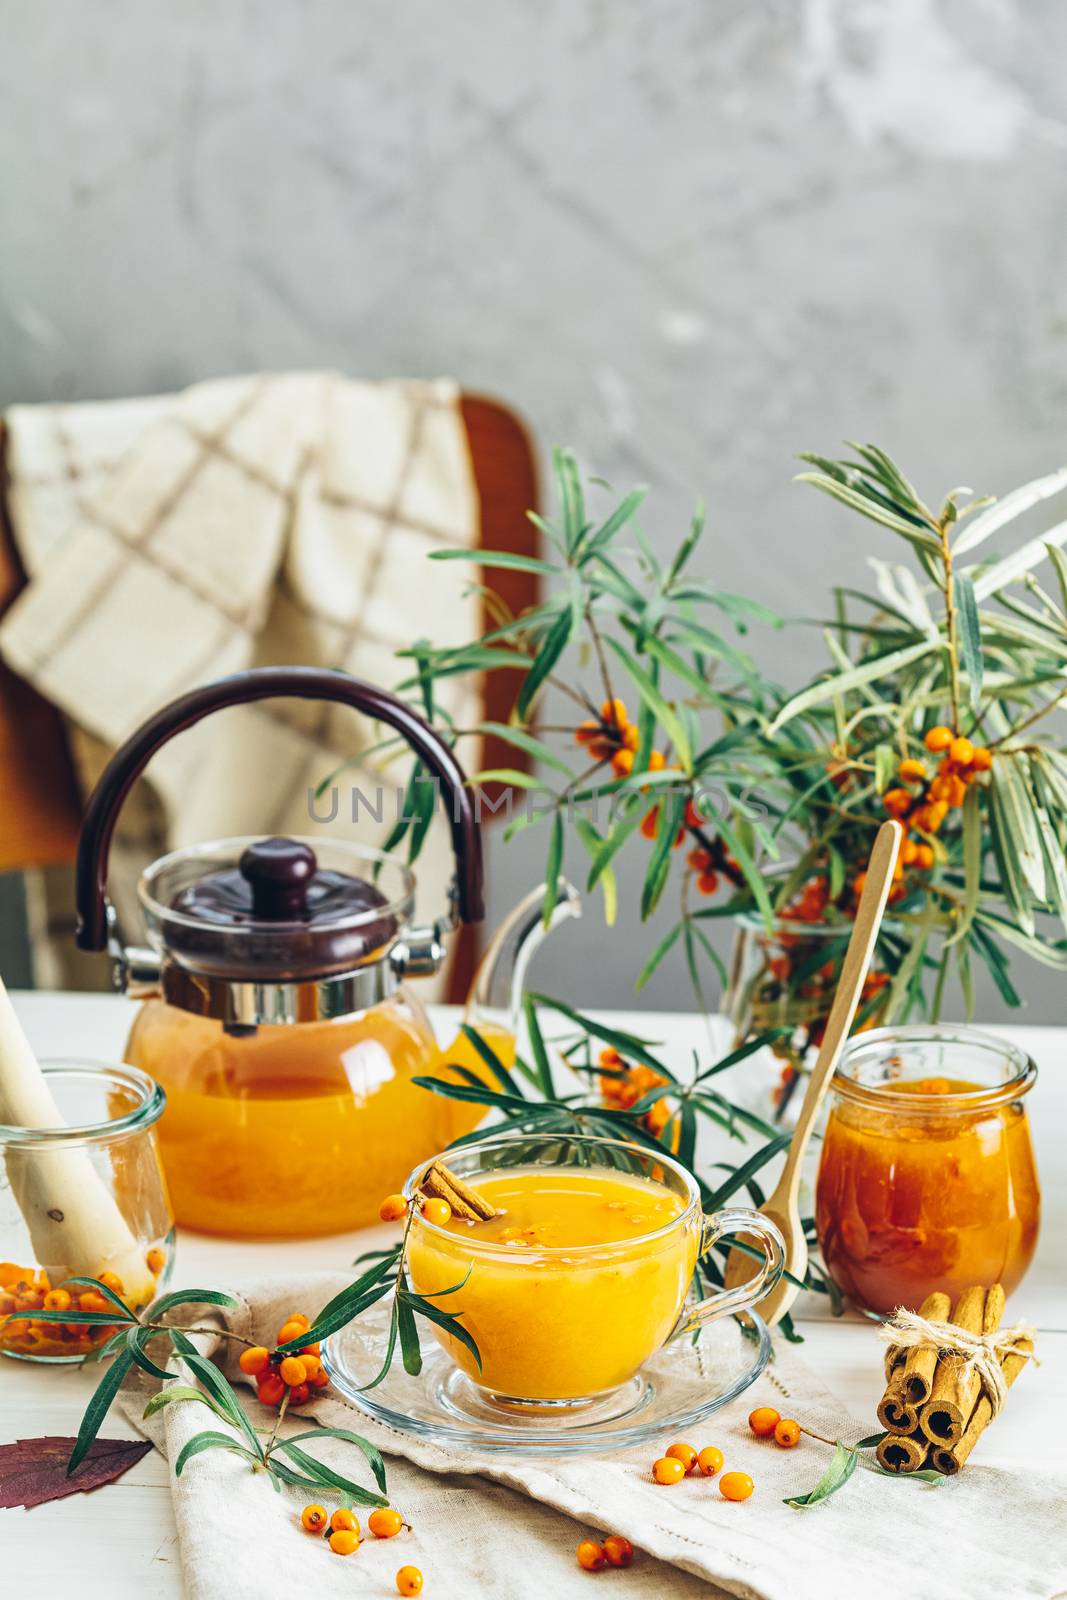 Cup and teapot of hot spicy tea with sea buckthorn, jam in the g by ArtSvitlyna